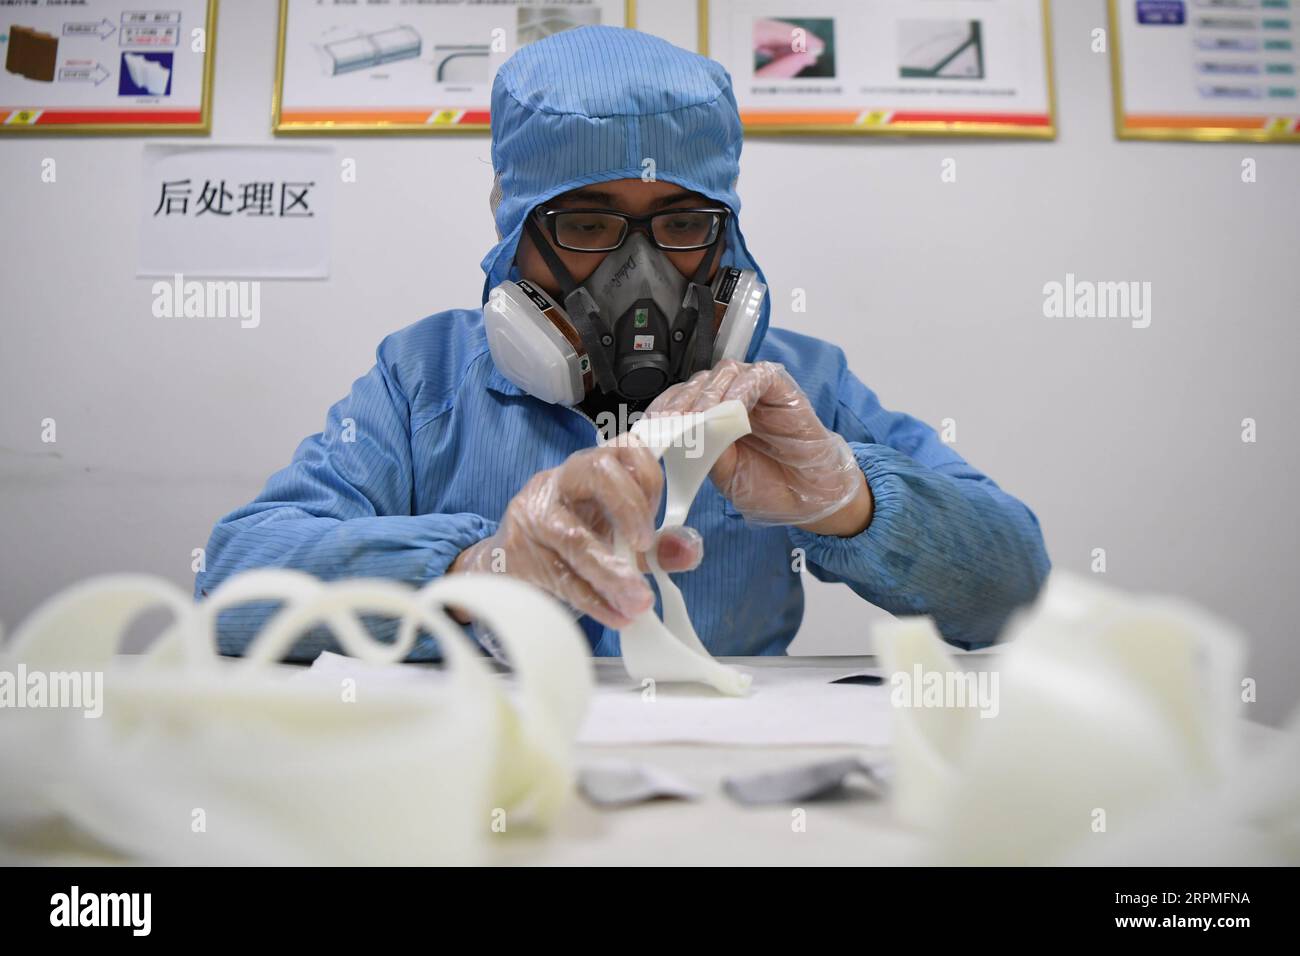 200211 -- CHANGSHA, Feb. 11, 2020 -- A worker polishes the spectacle frame of a pair of goggles made by 3D printer at the additive manufacturing research and application center of Hunan Vanguard Group Co., Ltd. in the economic development zone of Changsha City, central China s Hunan Province, Feb. 11, 2020. The company has been producing goggles for medical use with more than 50 3D printers working day and night recently. The first batch of 500 pairs of goggles it produced have been sent to Changsha and Huaihua to aid the novel coronavirus control efforts there.  CHINA-HUNAN-CHANGSHA-CORONAVIR Stock Photo